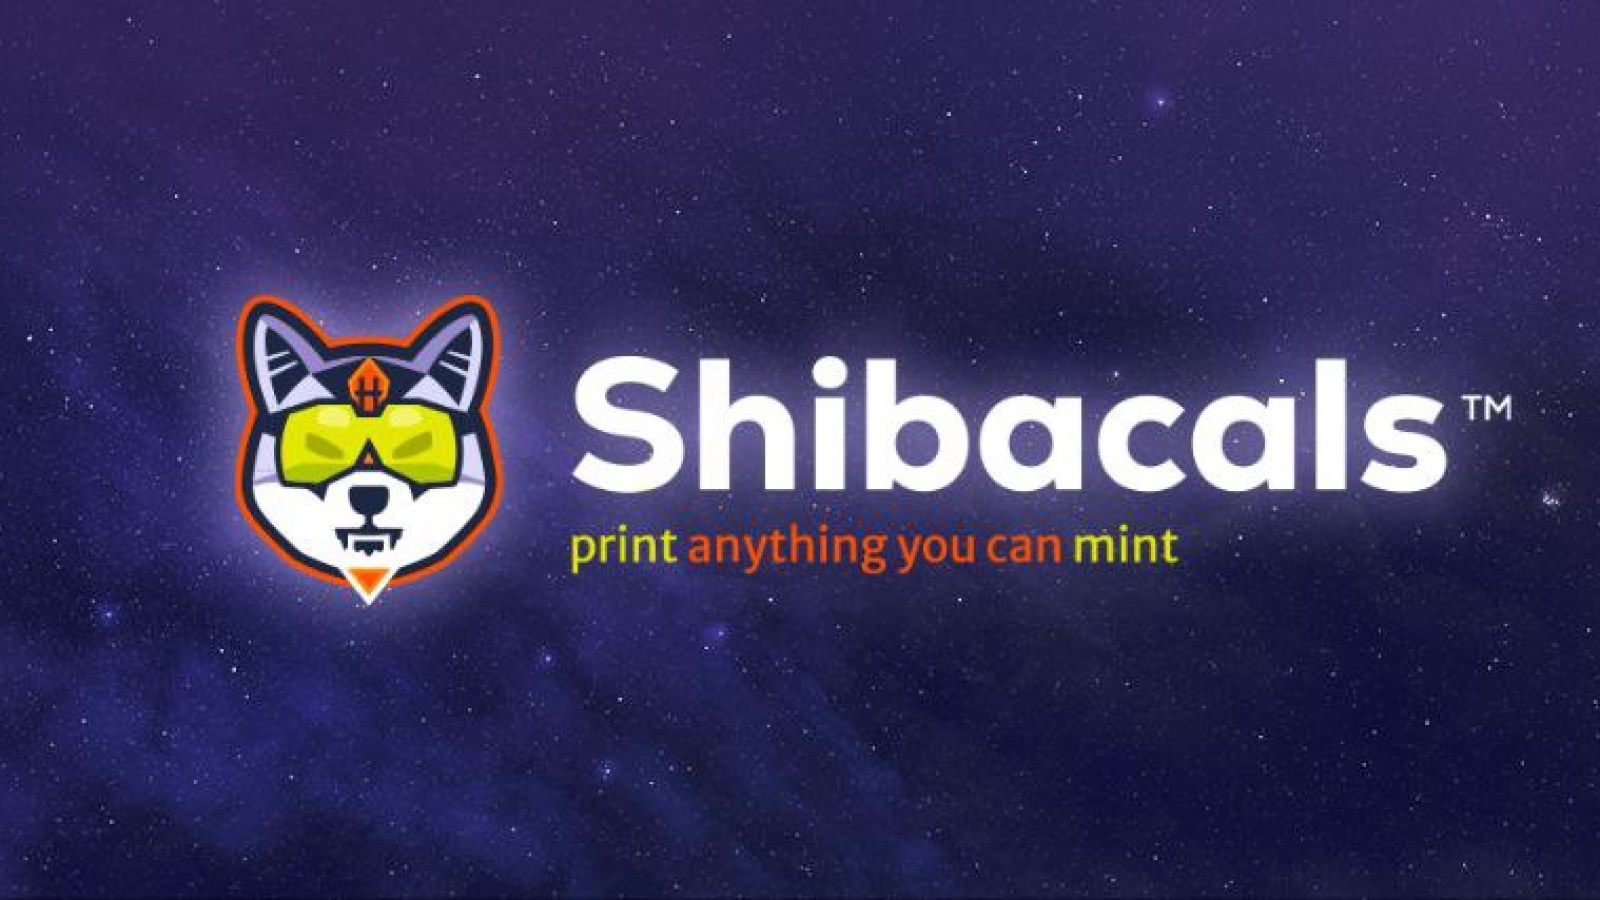 Shibacals and Busta Rhymes Collaborate for Shiba Inu NFT Launch